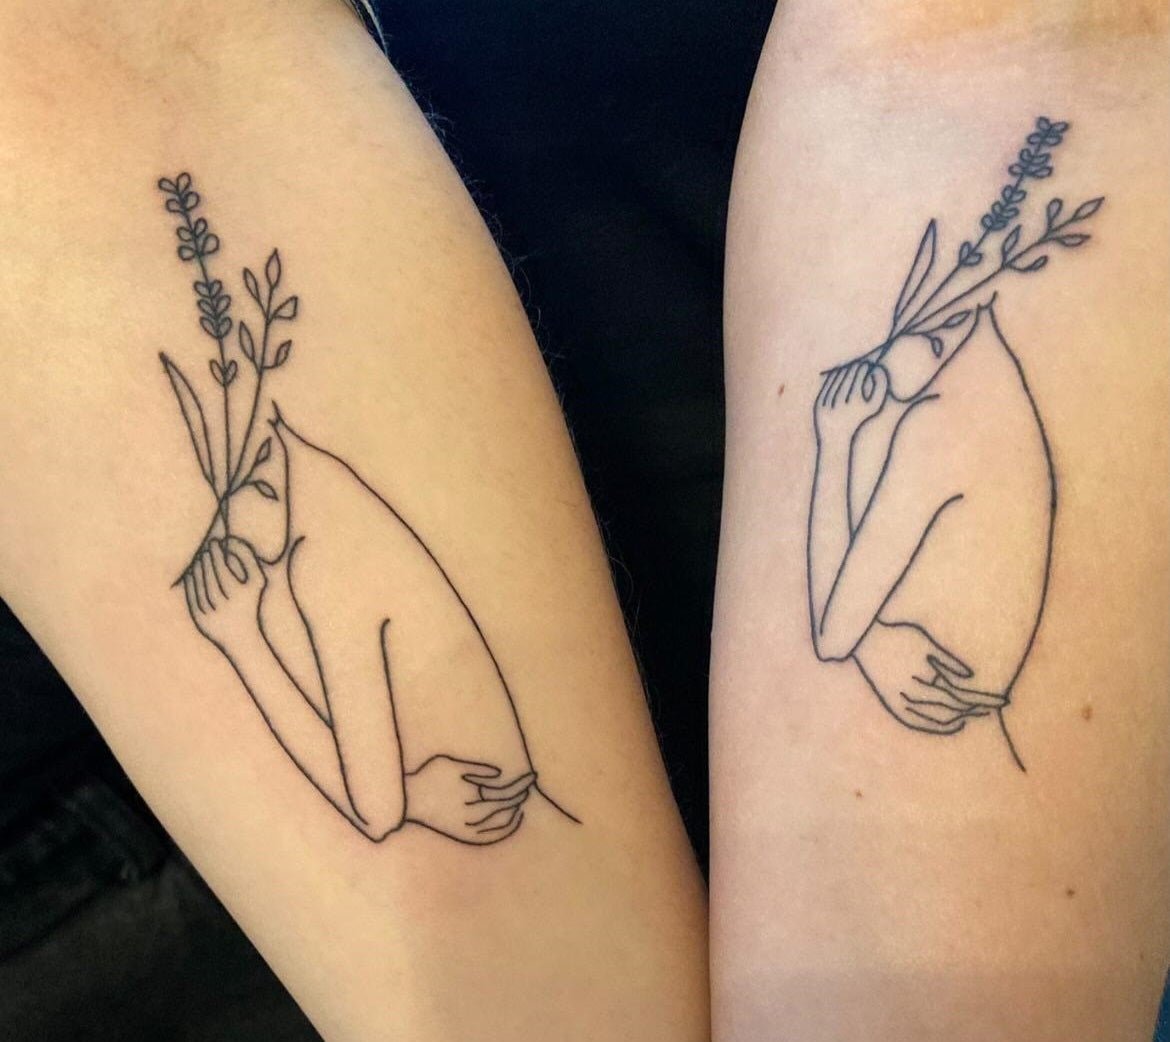 The most gorgeous matching BFF tattoo ideas